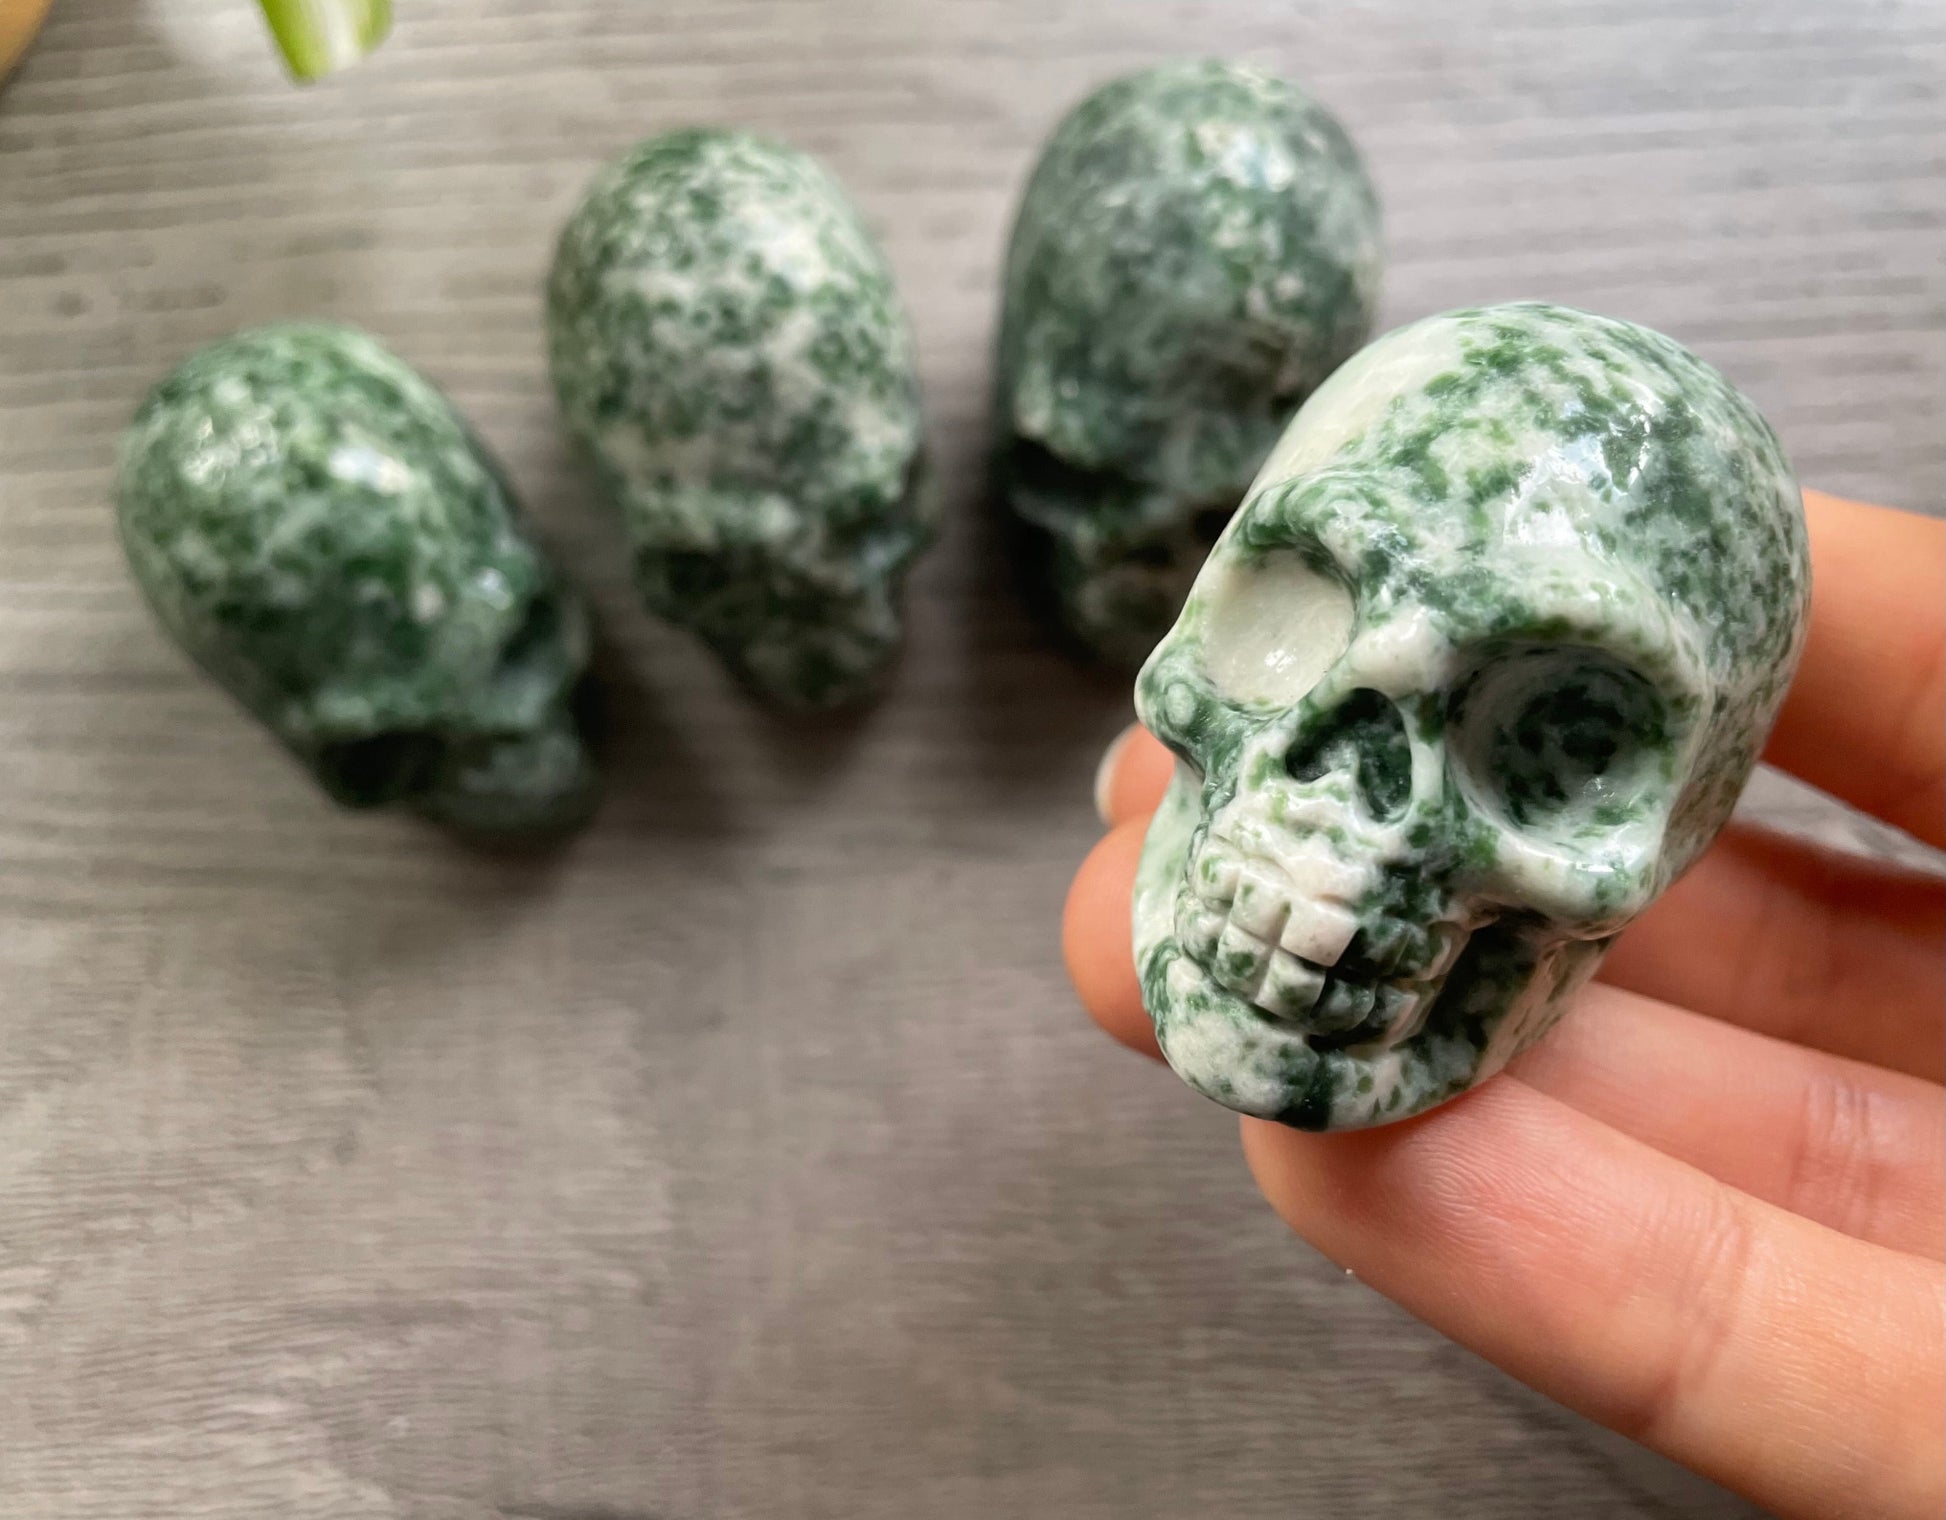 Pictured are various small skulls carved out of ching hai "jade"